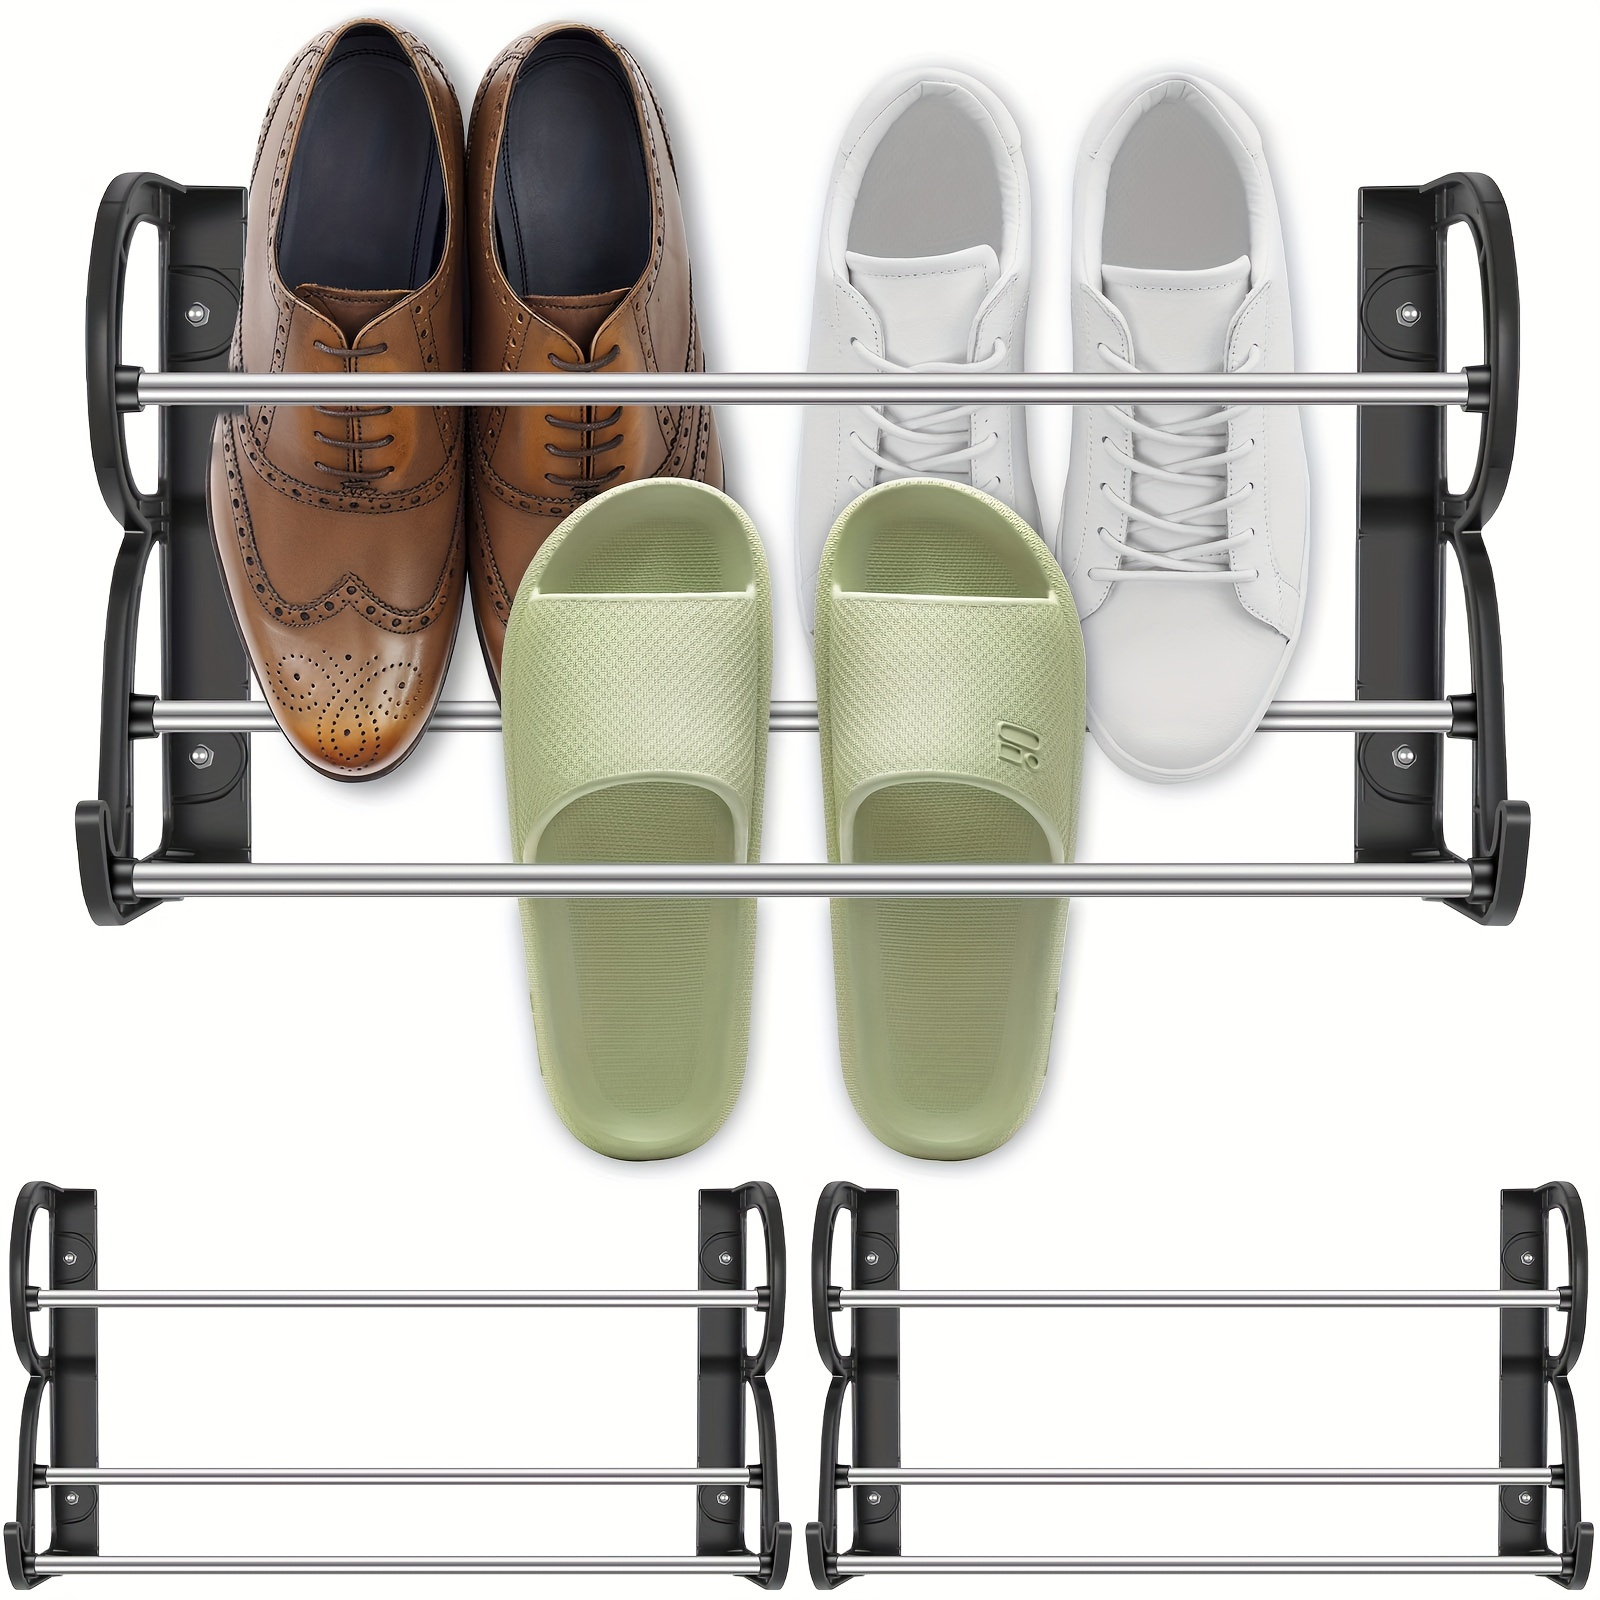 Stainless steel wall mounted shoe rack